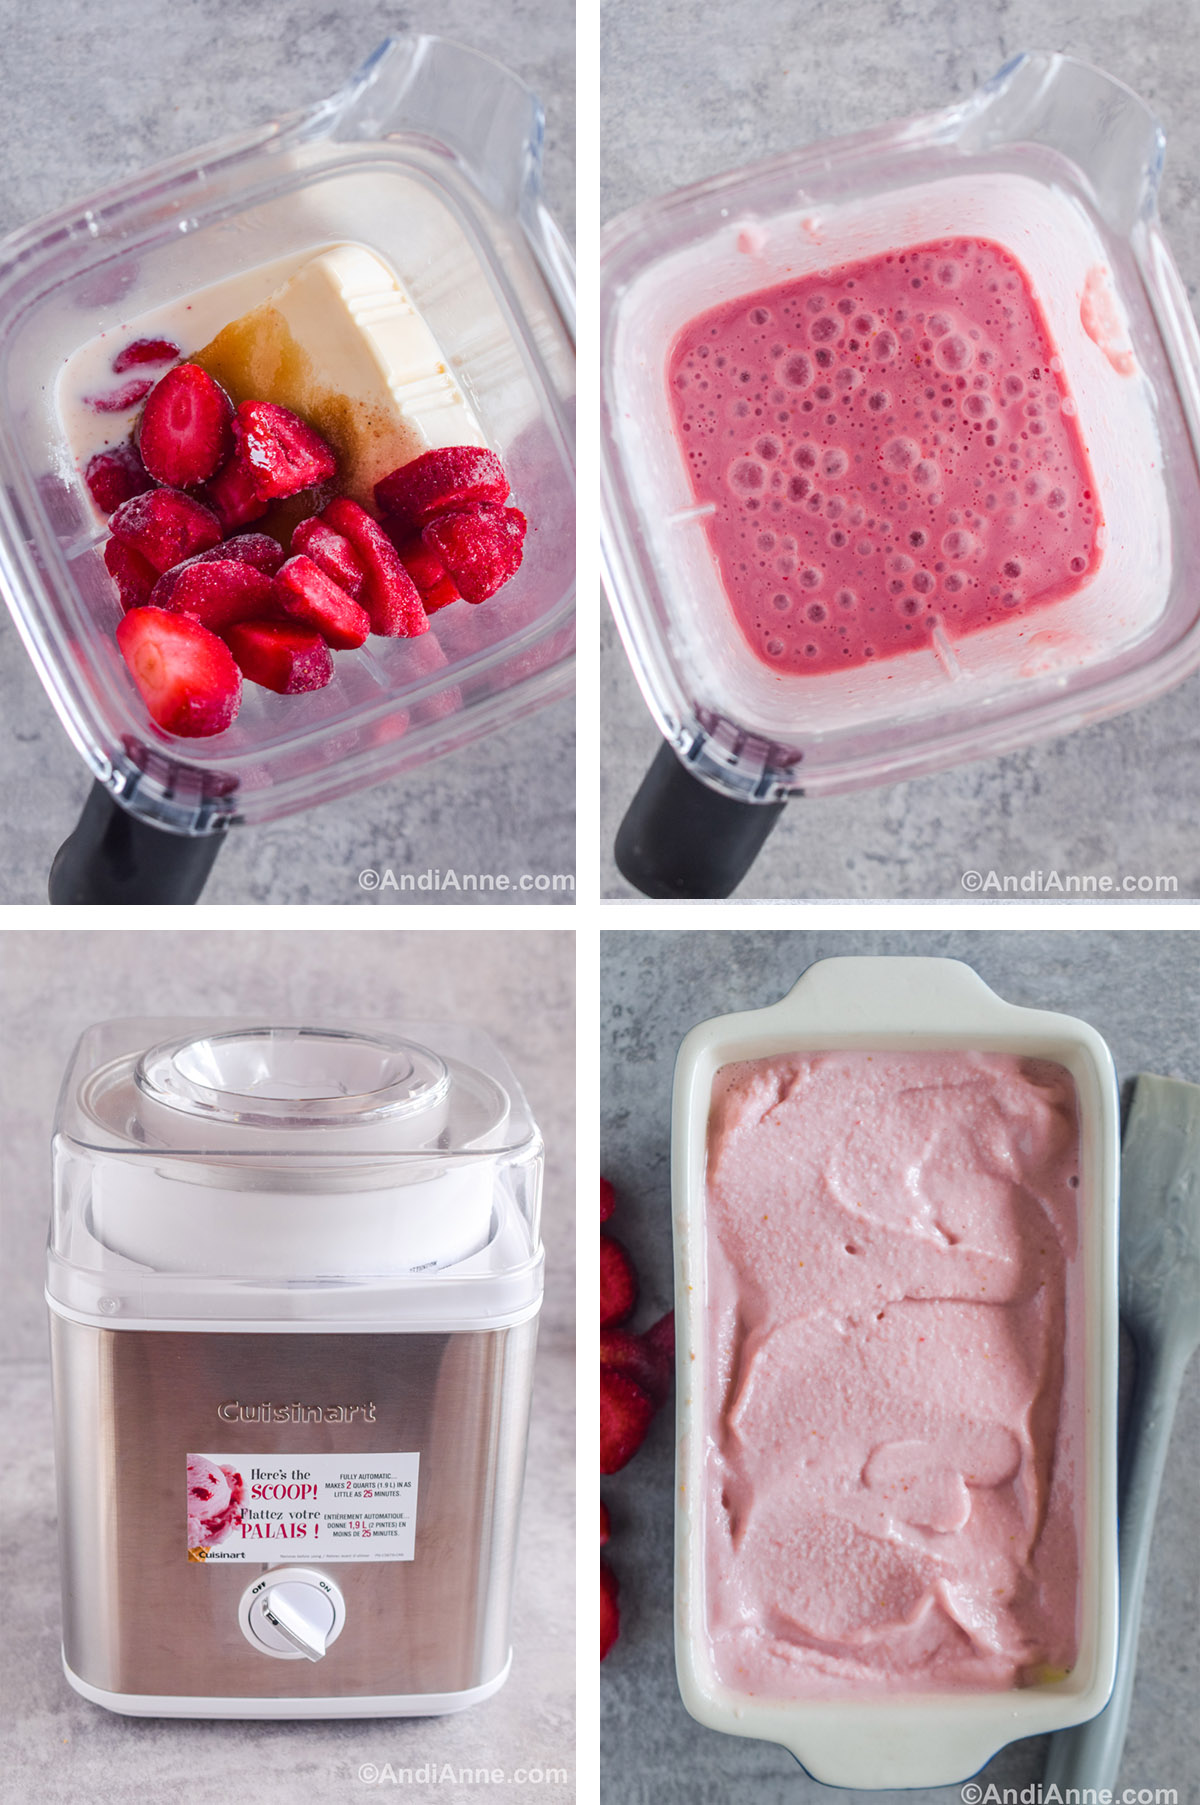 Four images showing steps to make the recipe. First and second are looking into a blender cup, first with frozen strawberries, tofu, sugar, and milk inside. Second is blended pink liquid. Third is a cuisinart ice cream maker. Fourth is a white rectangular ceramic dish with pink soft ice cream poured inside.